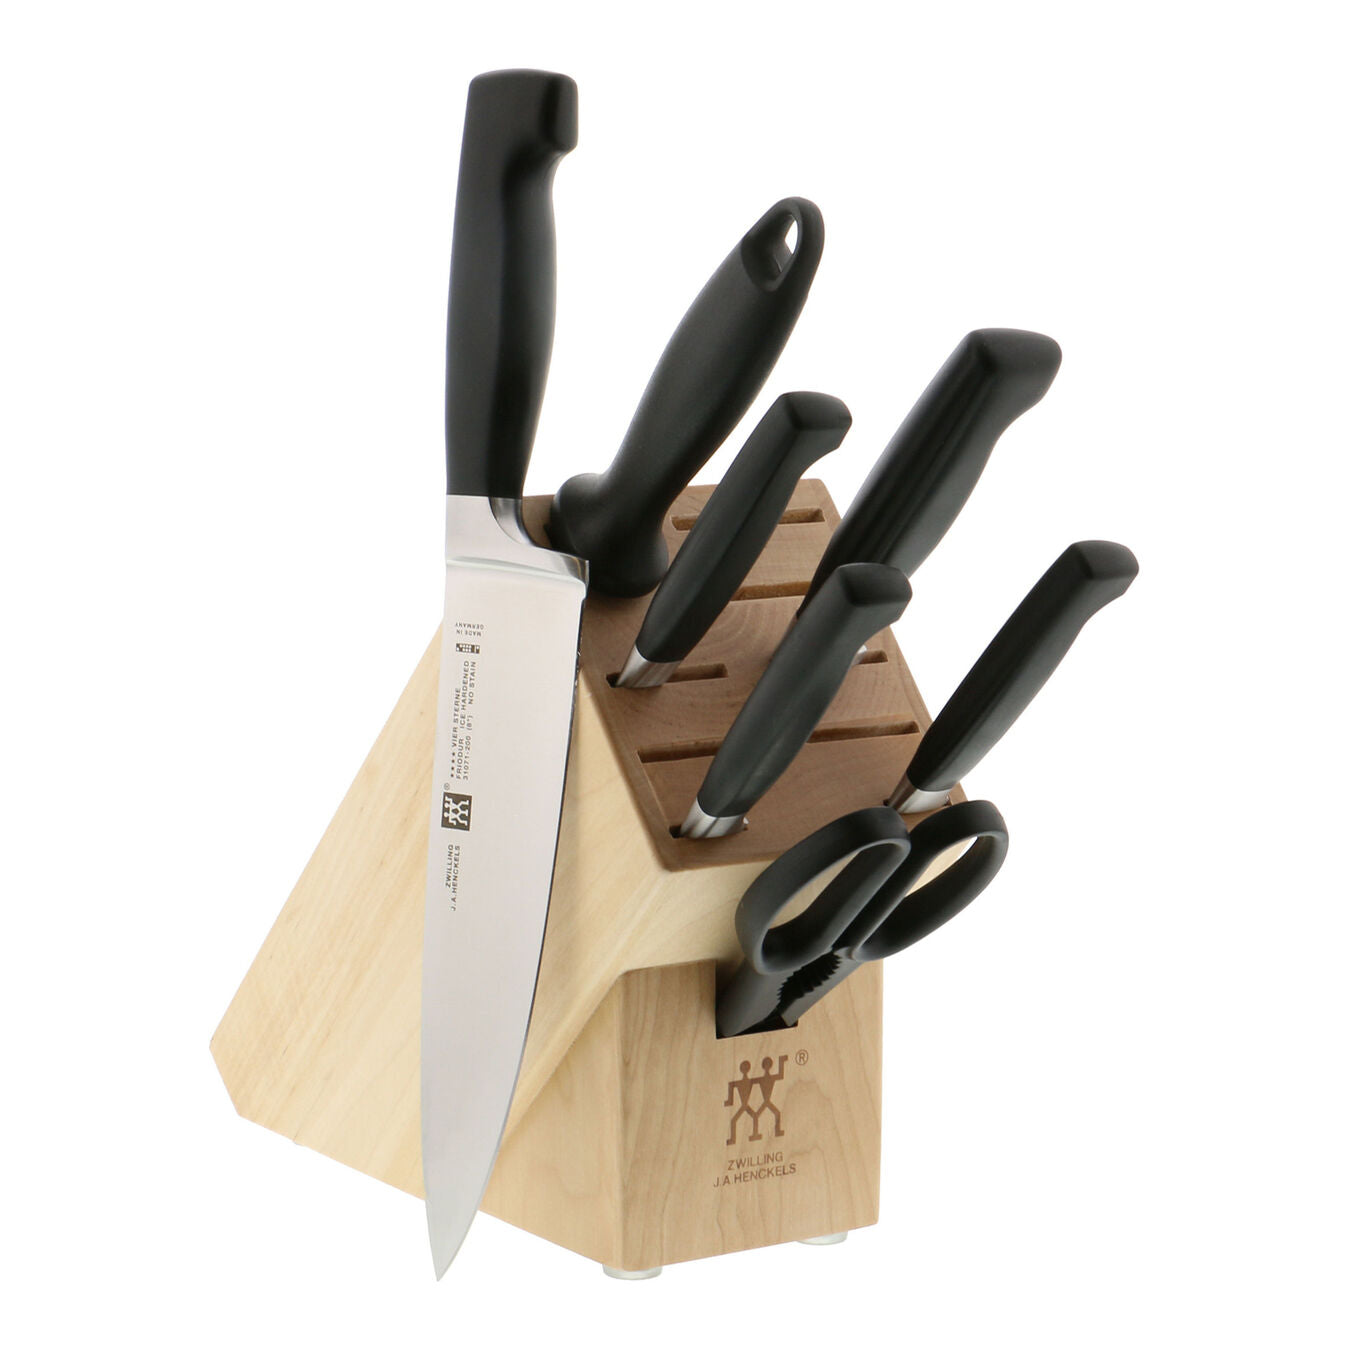 ZWILLING 8pc Knife Block Set, Four Star Series